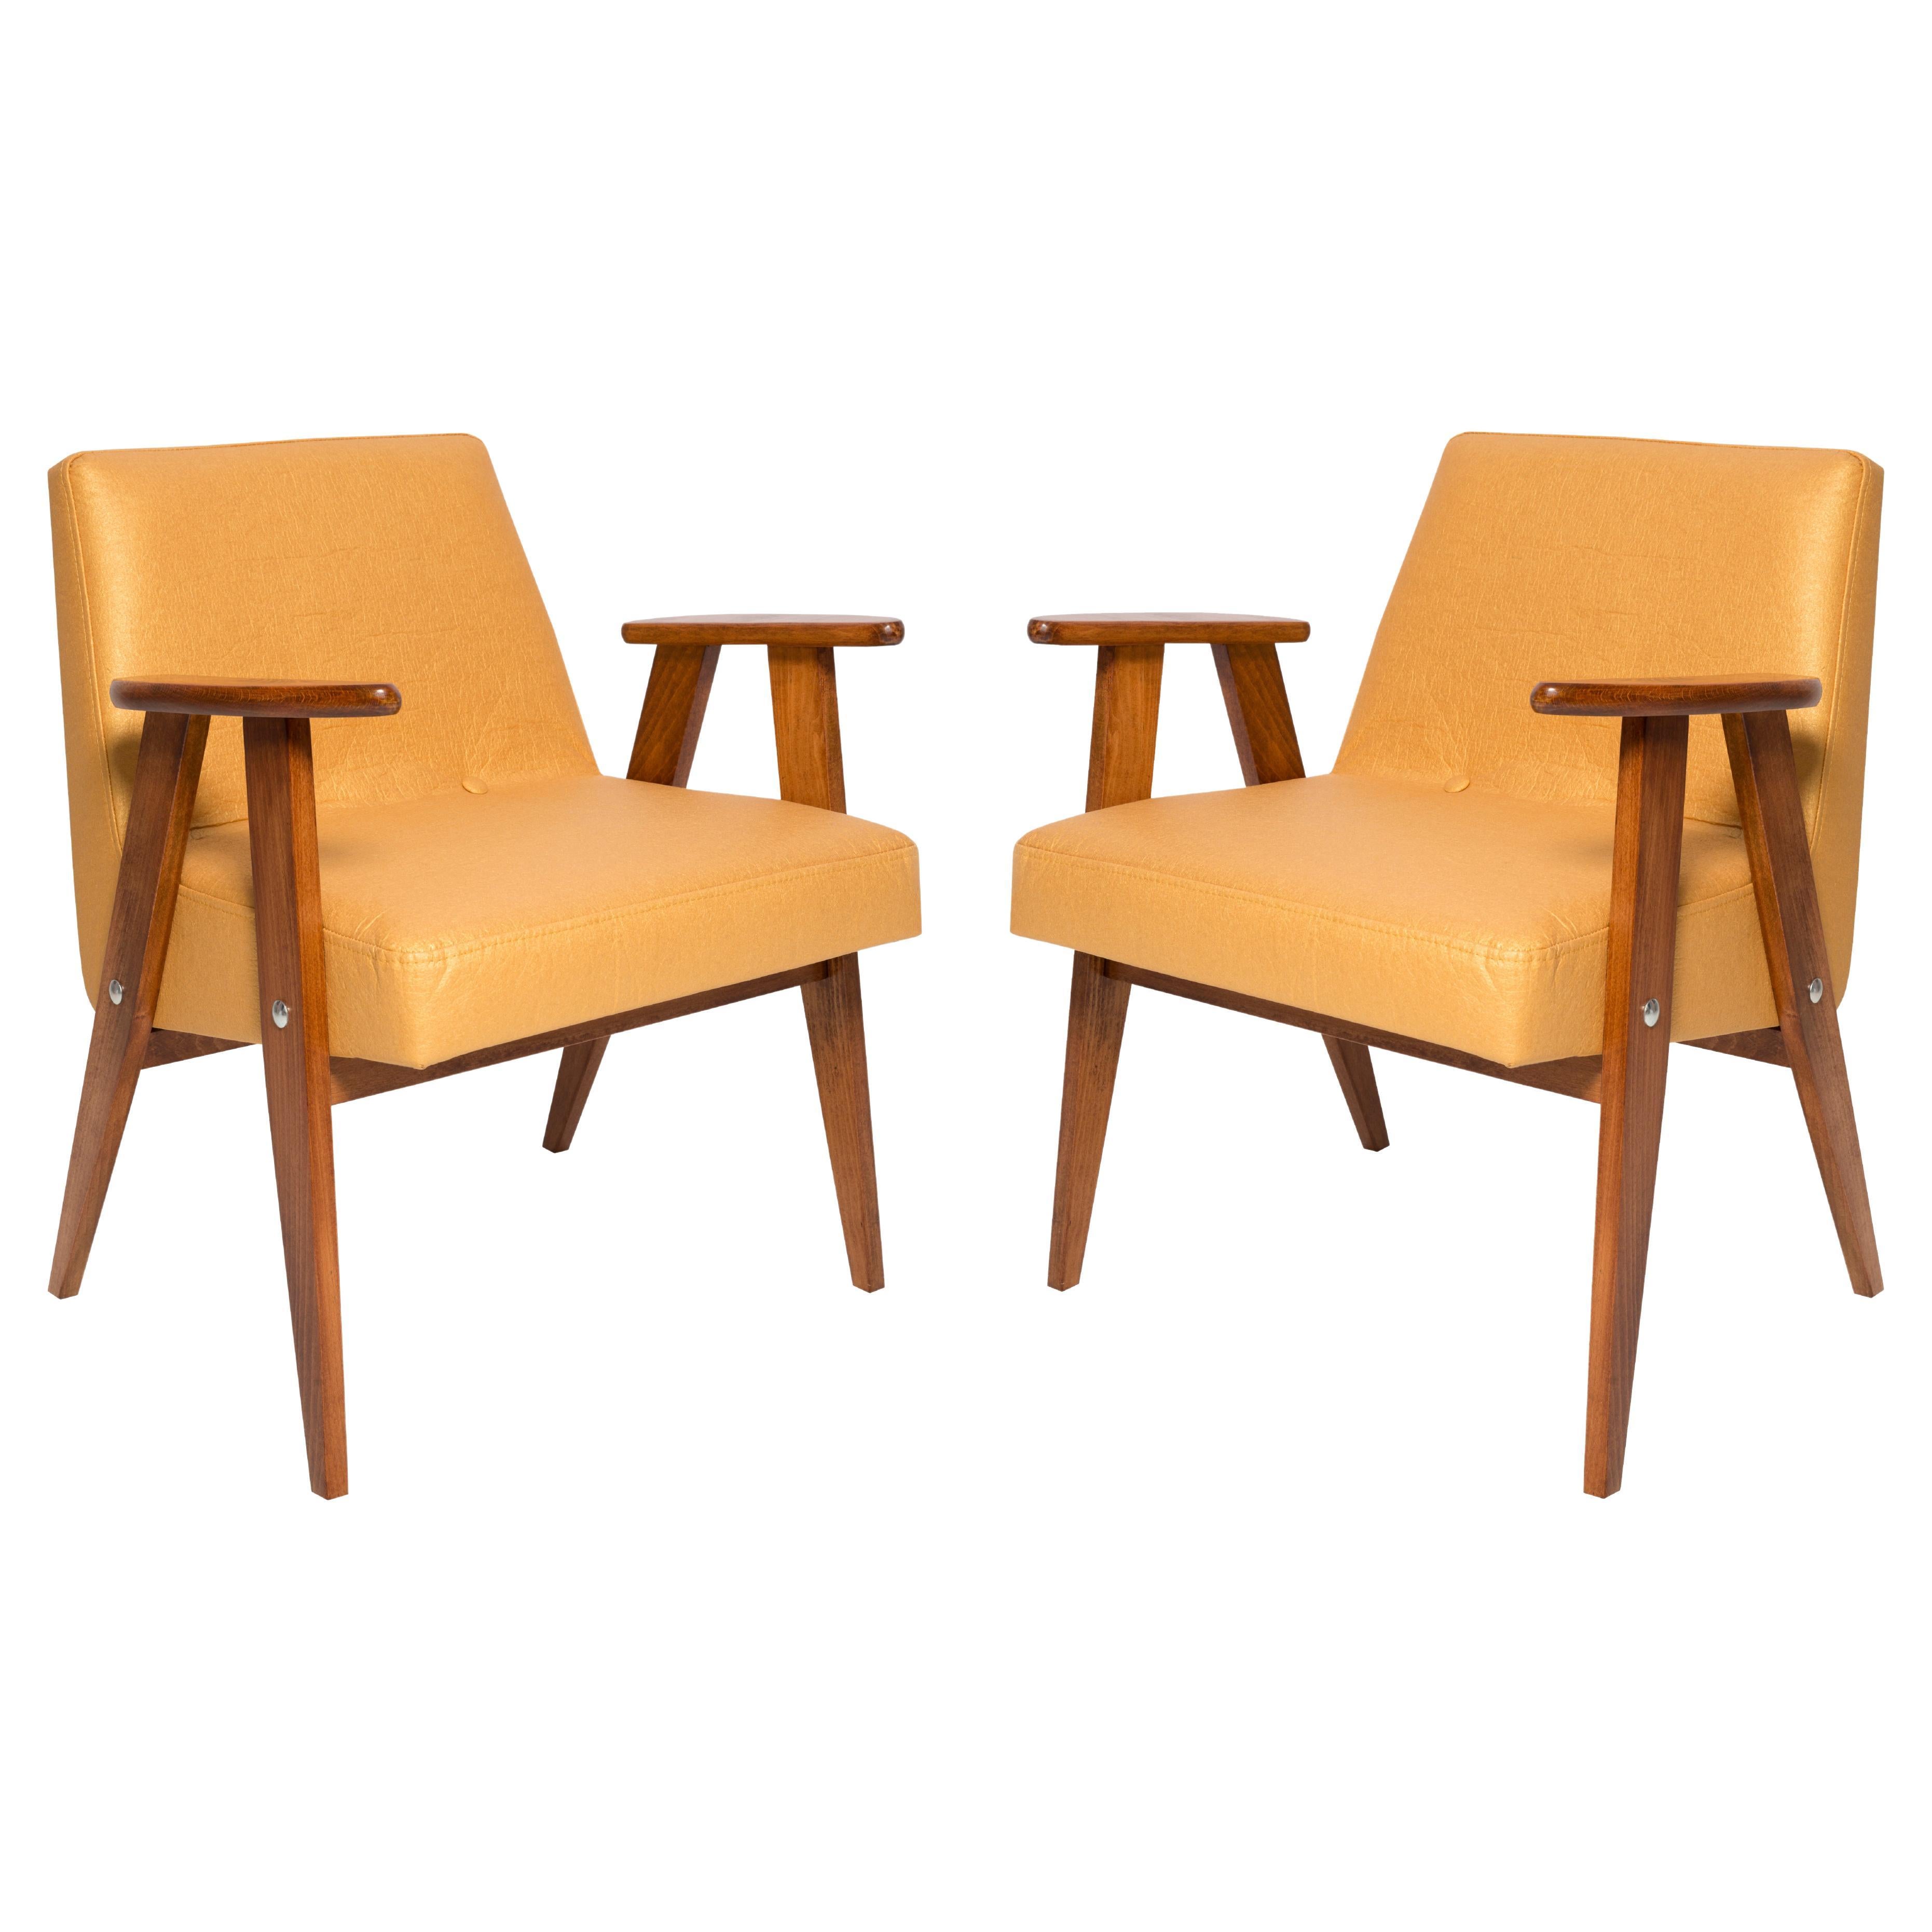 Two Midcentury 366 Club Armchairs in Pineapple Leather, Jozef Chierowski, 1960s For Sale